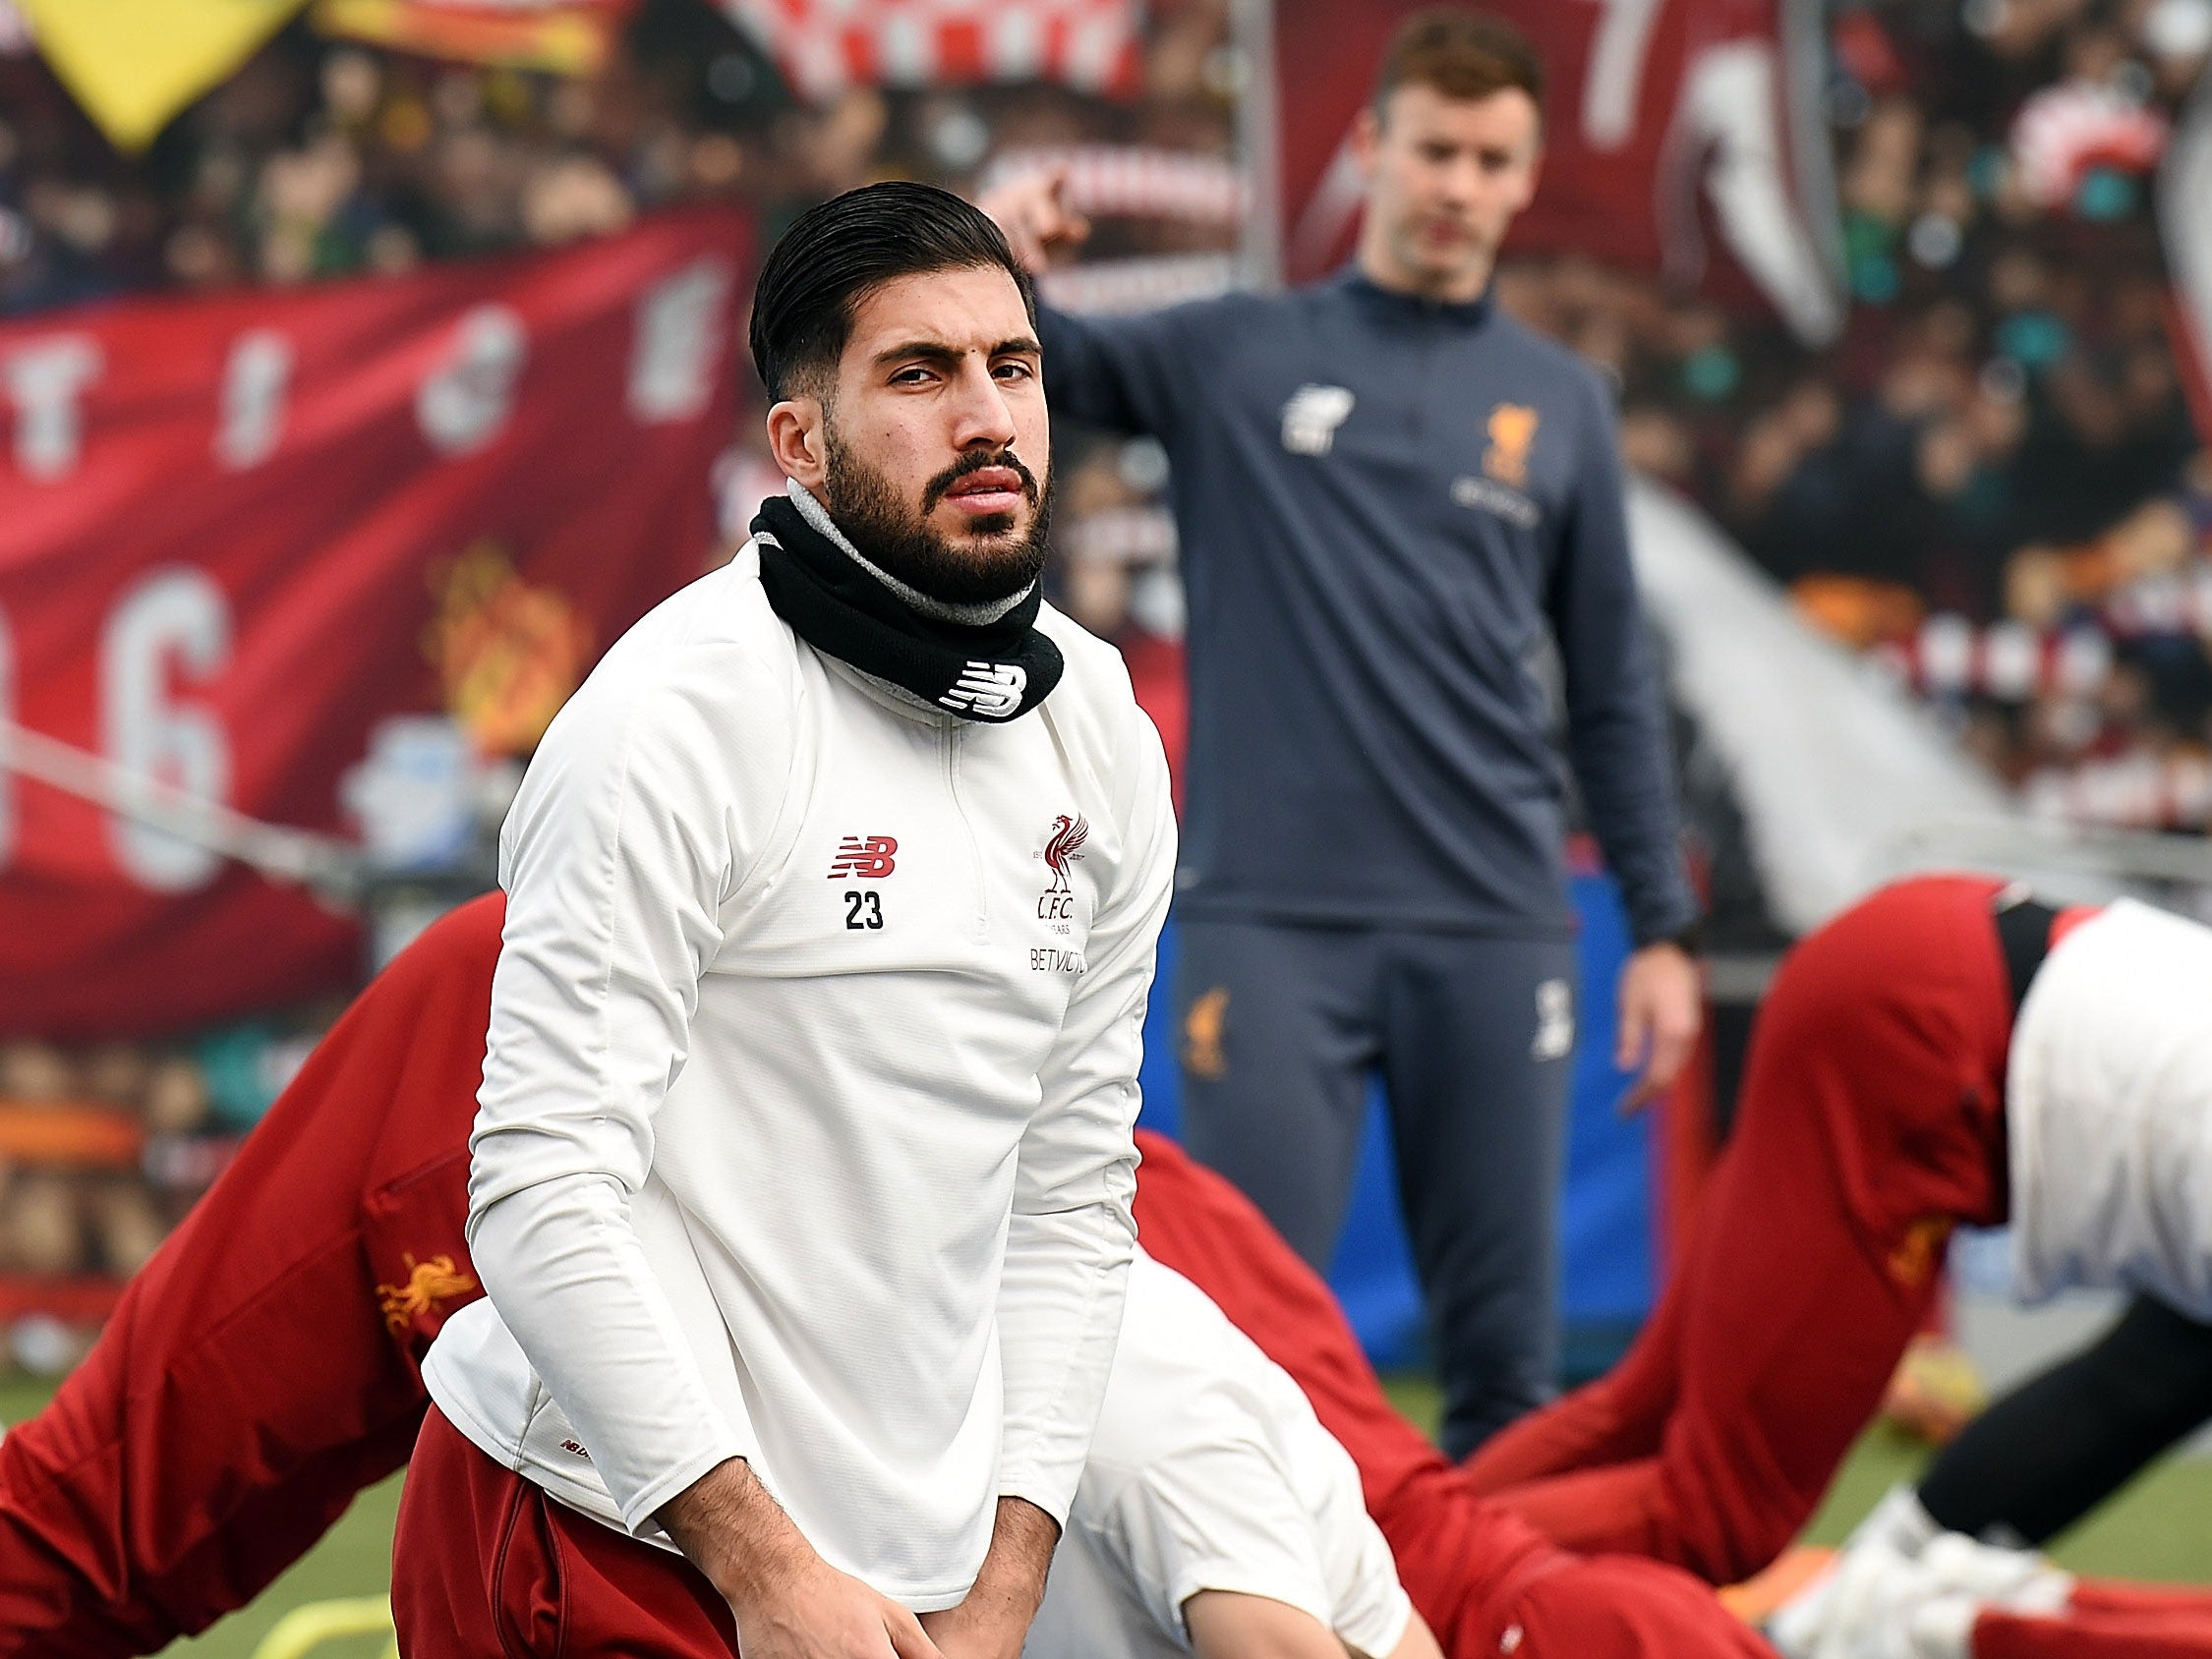 Emre Can has not played since suffering a back injury in March